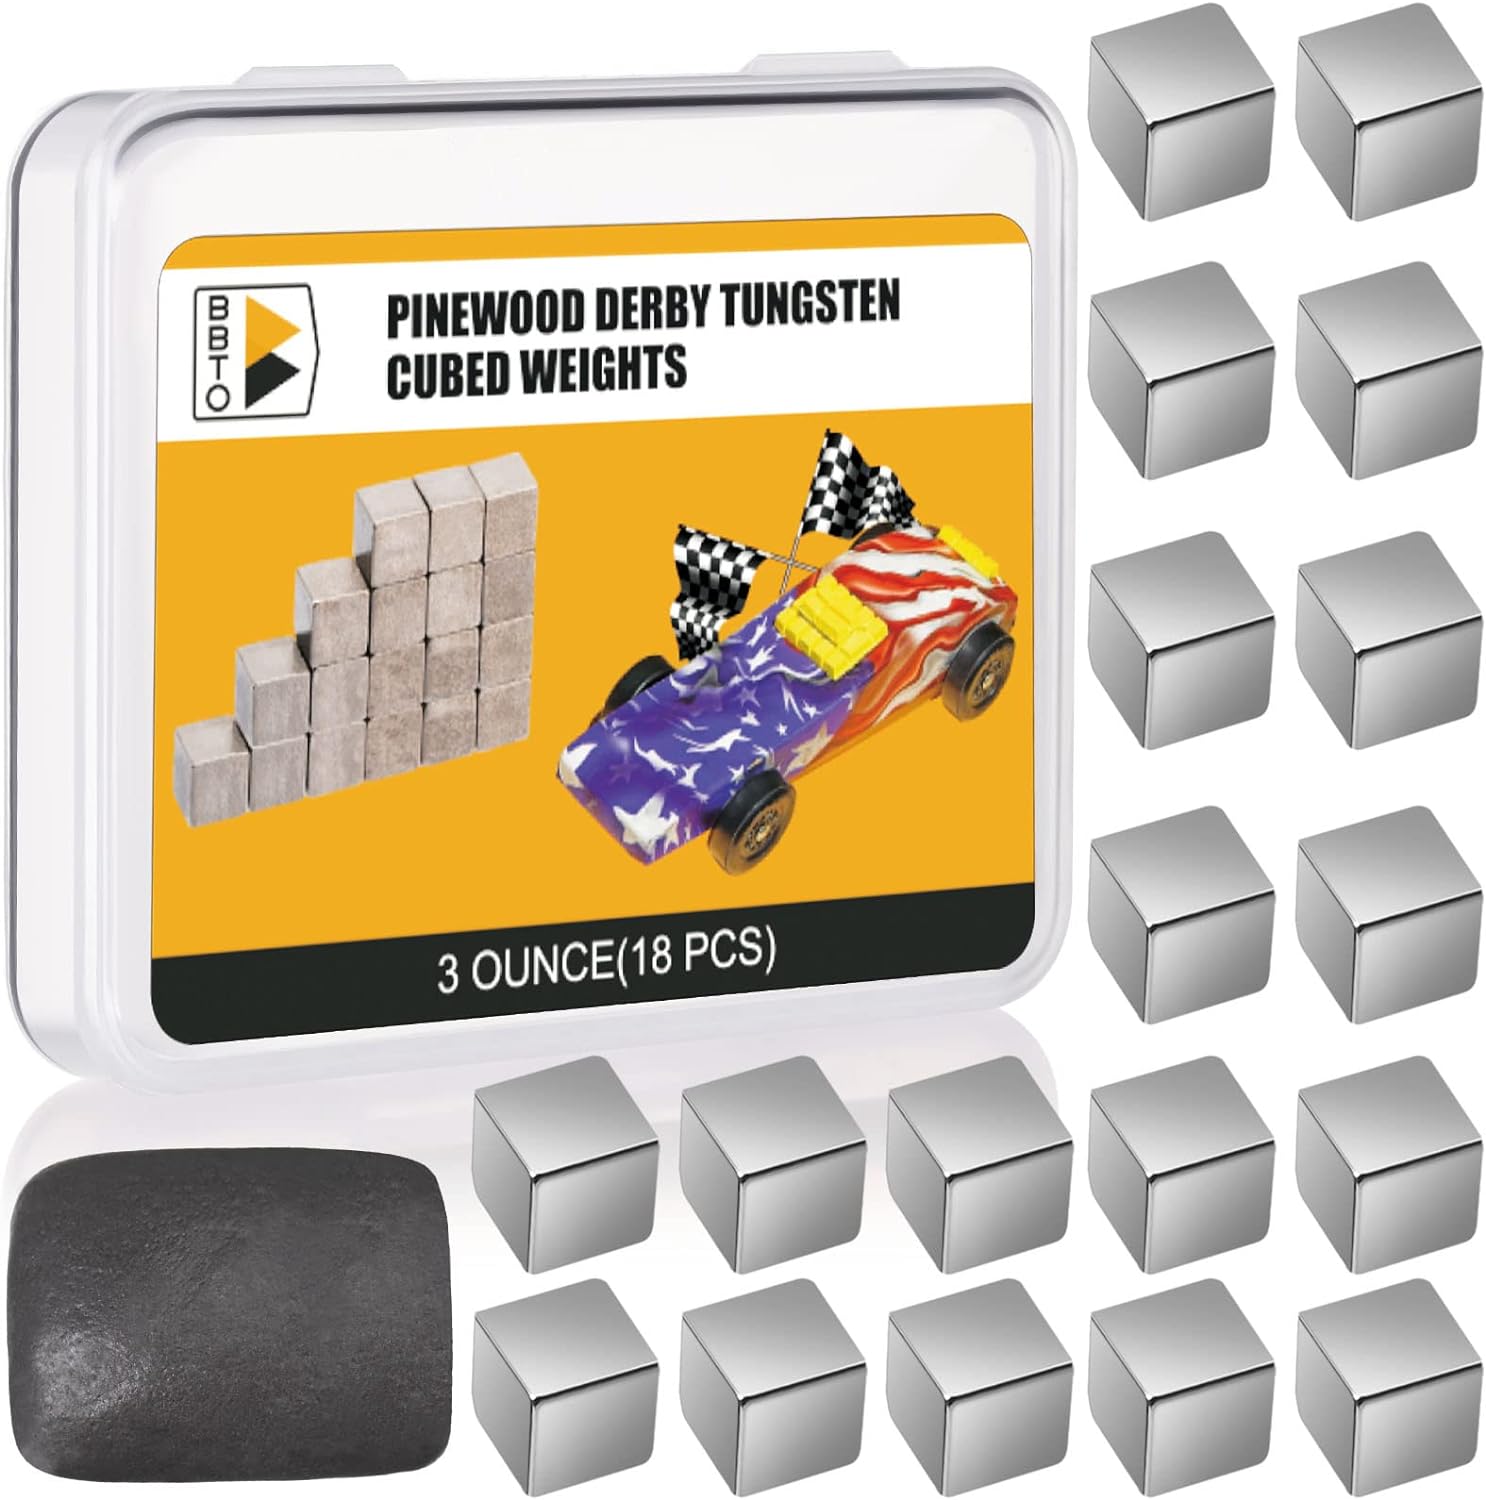 BBTO 3 Ounce Tungsten Cubed Weights and 1 Ounce Tungsten Putty Incremental Derby Weight Compatible with Pinewood Car Derby Weights for Maximum Speed